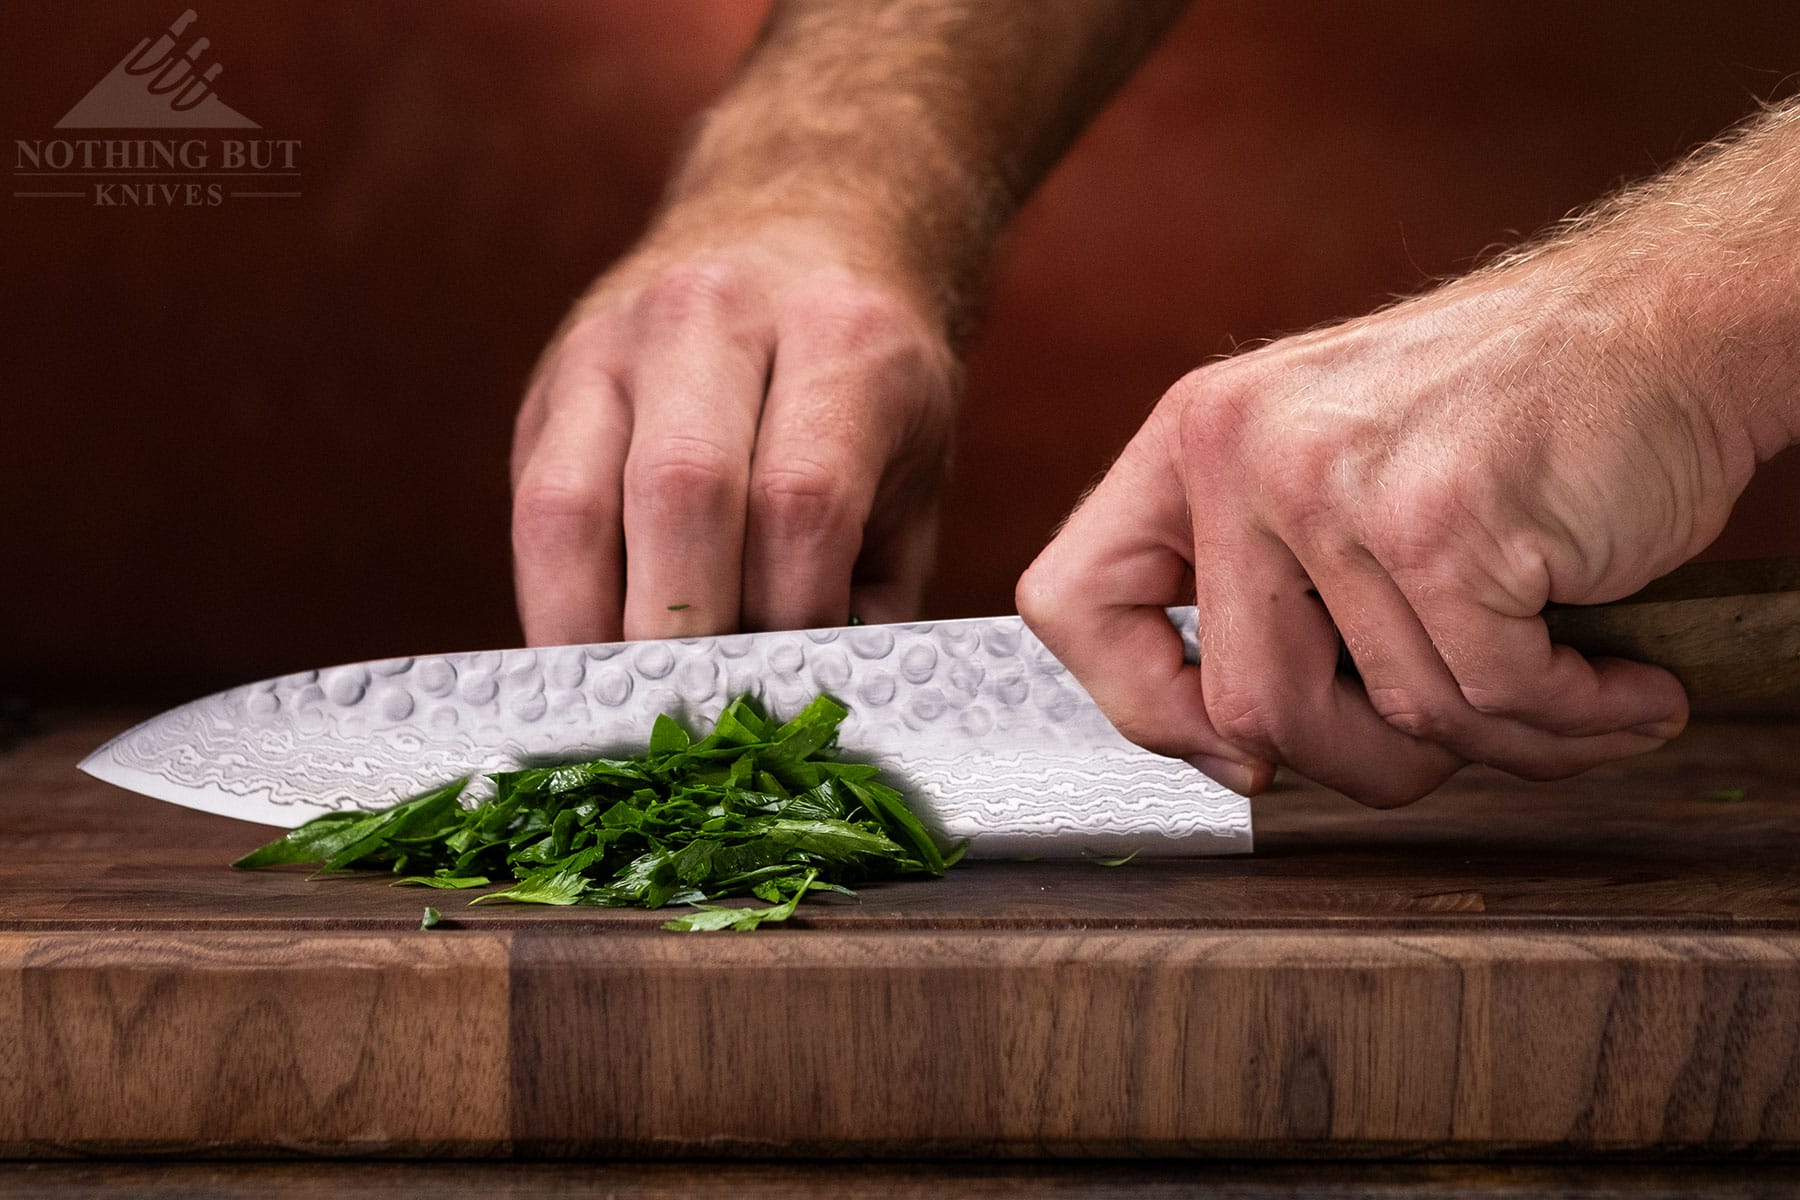 The Oishya 8 inch chef knife being used to dice onions on a wood cutting board.